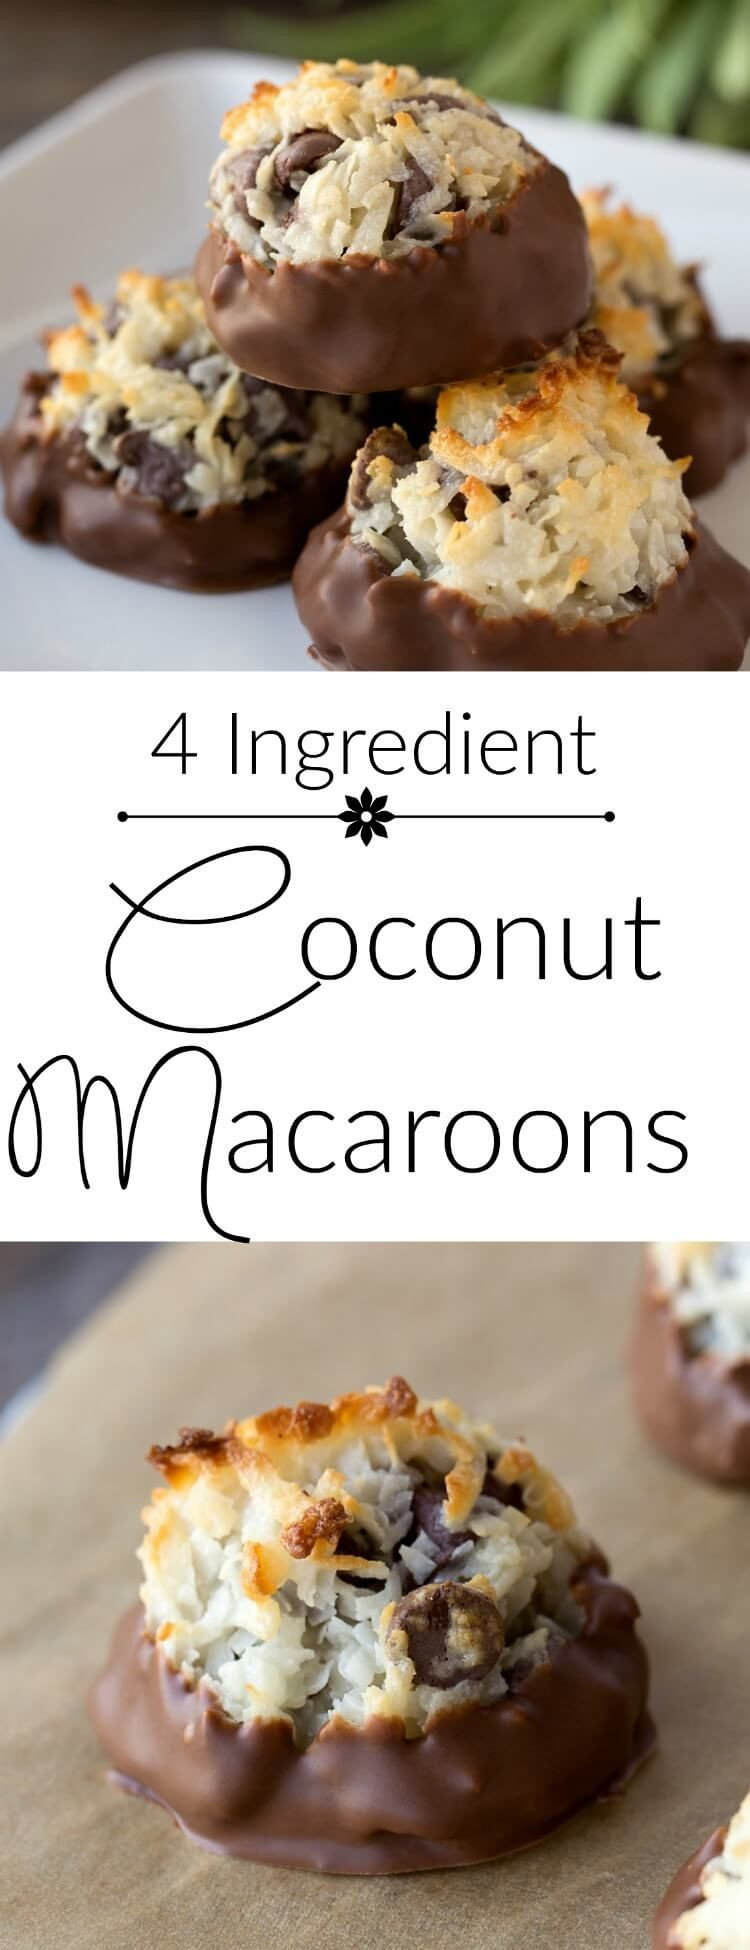 Passover Coconut Macaroon Recipe
 Coconut Macaroons Recipe only four ingre nts and